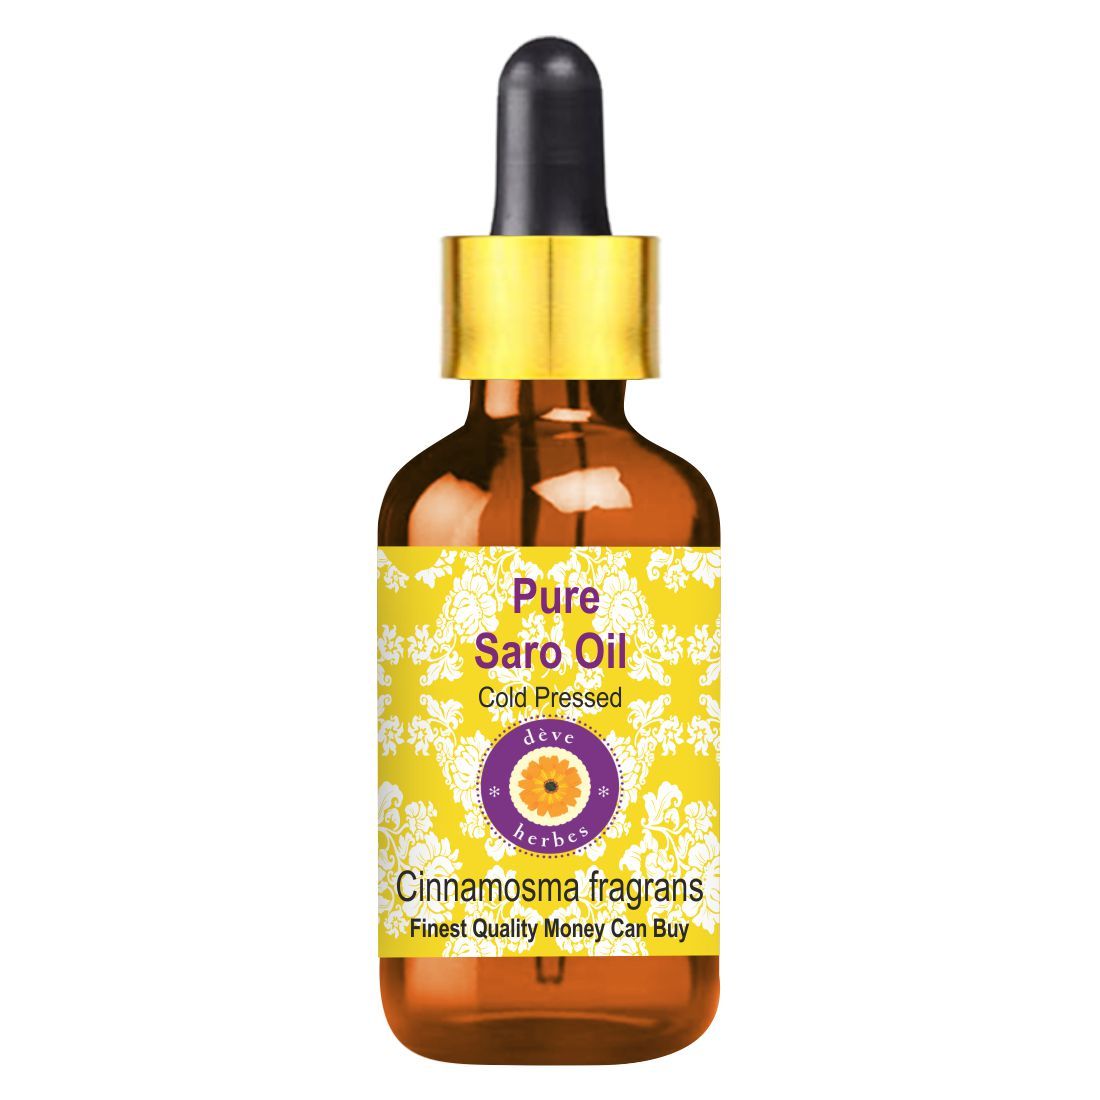 Deve Herbes Pure Saro Oil (Cinnamosma Fragrans) Cold Pressed (5 ml) At Nykaa, Best Beauty Products Online